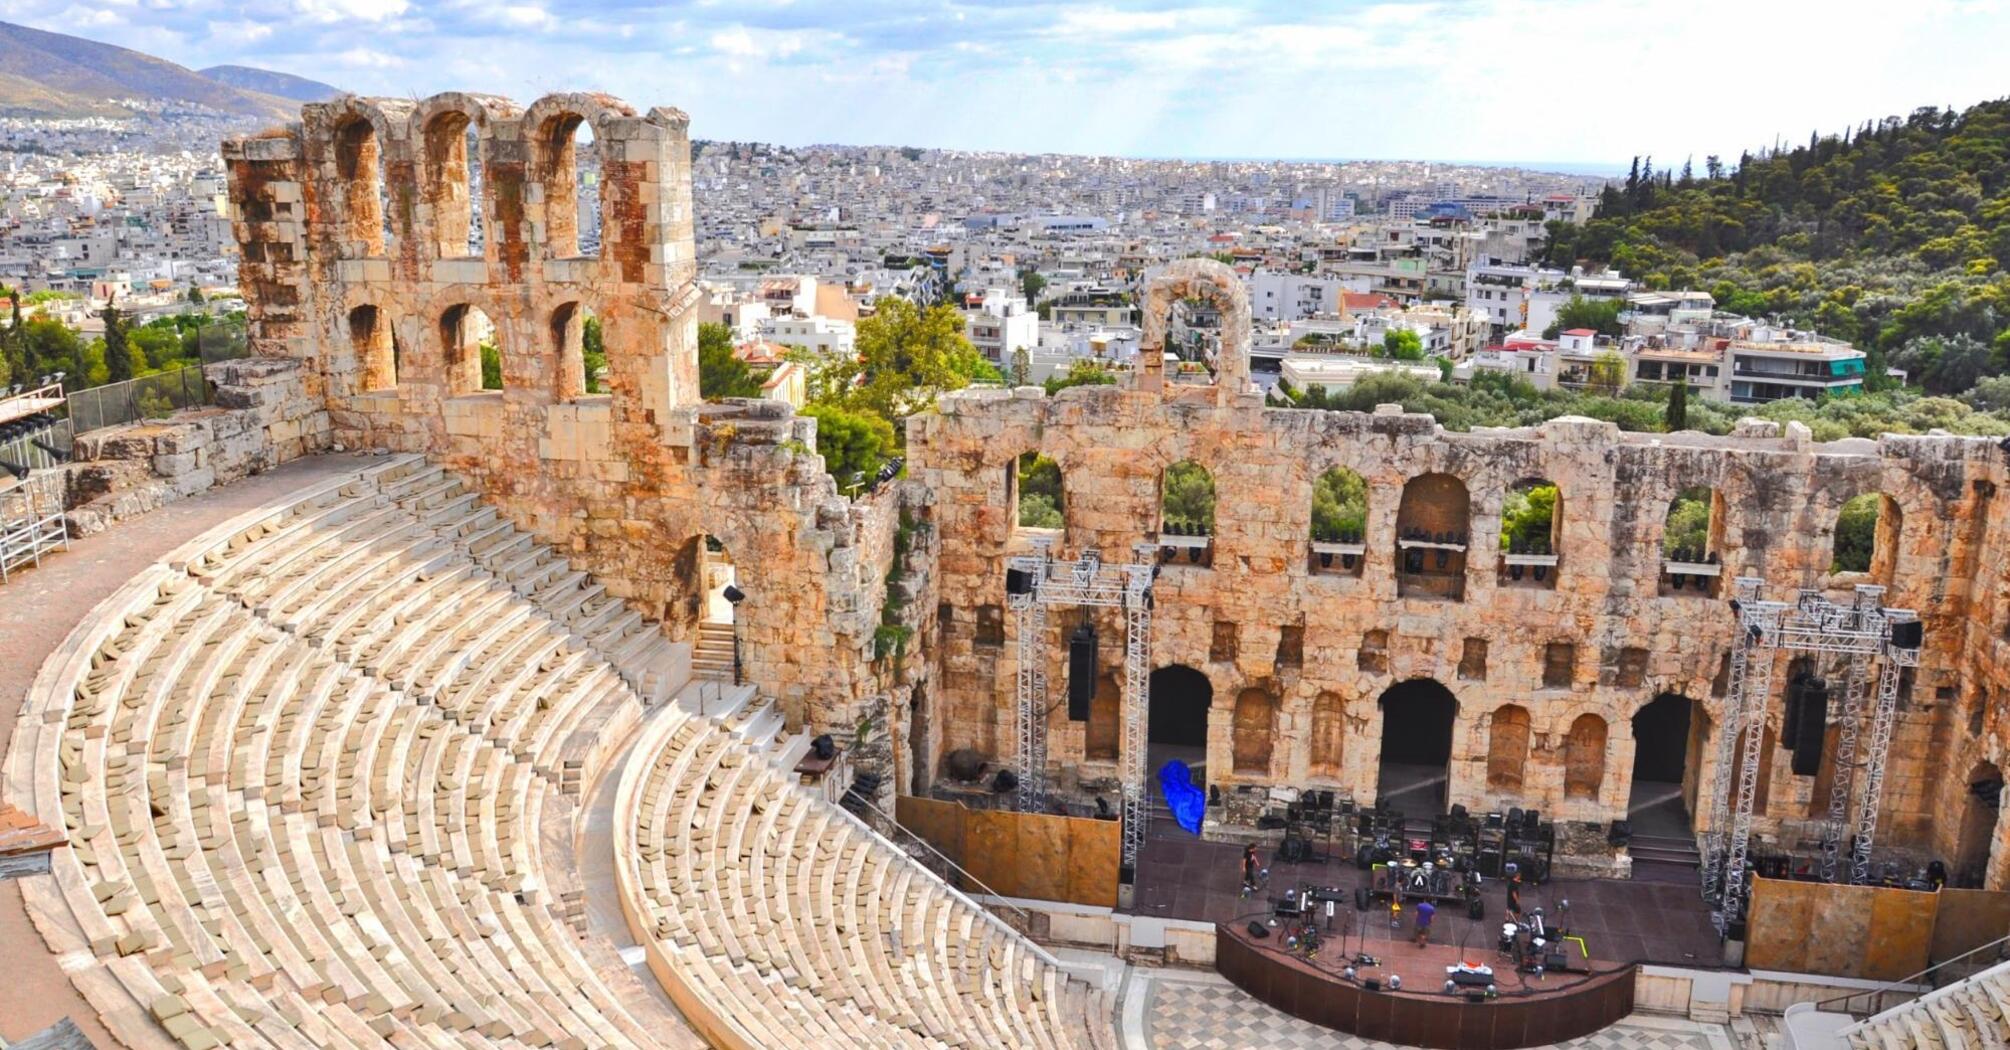 View of the ancient amphitheater with the modern city in the background